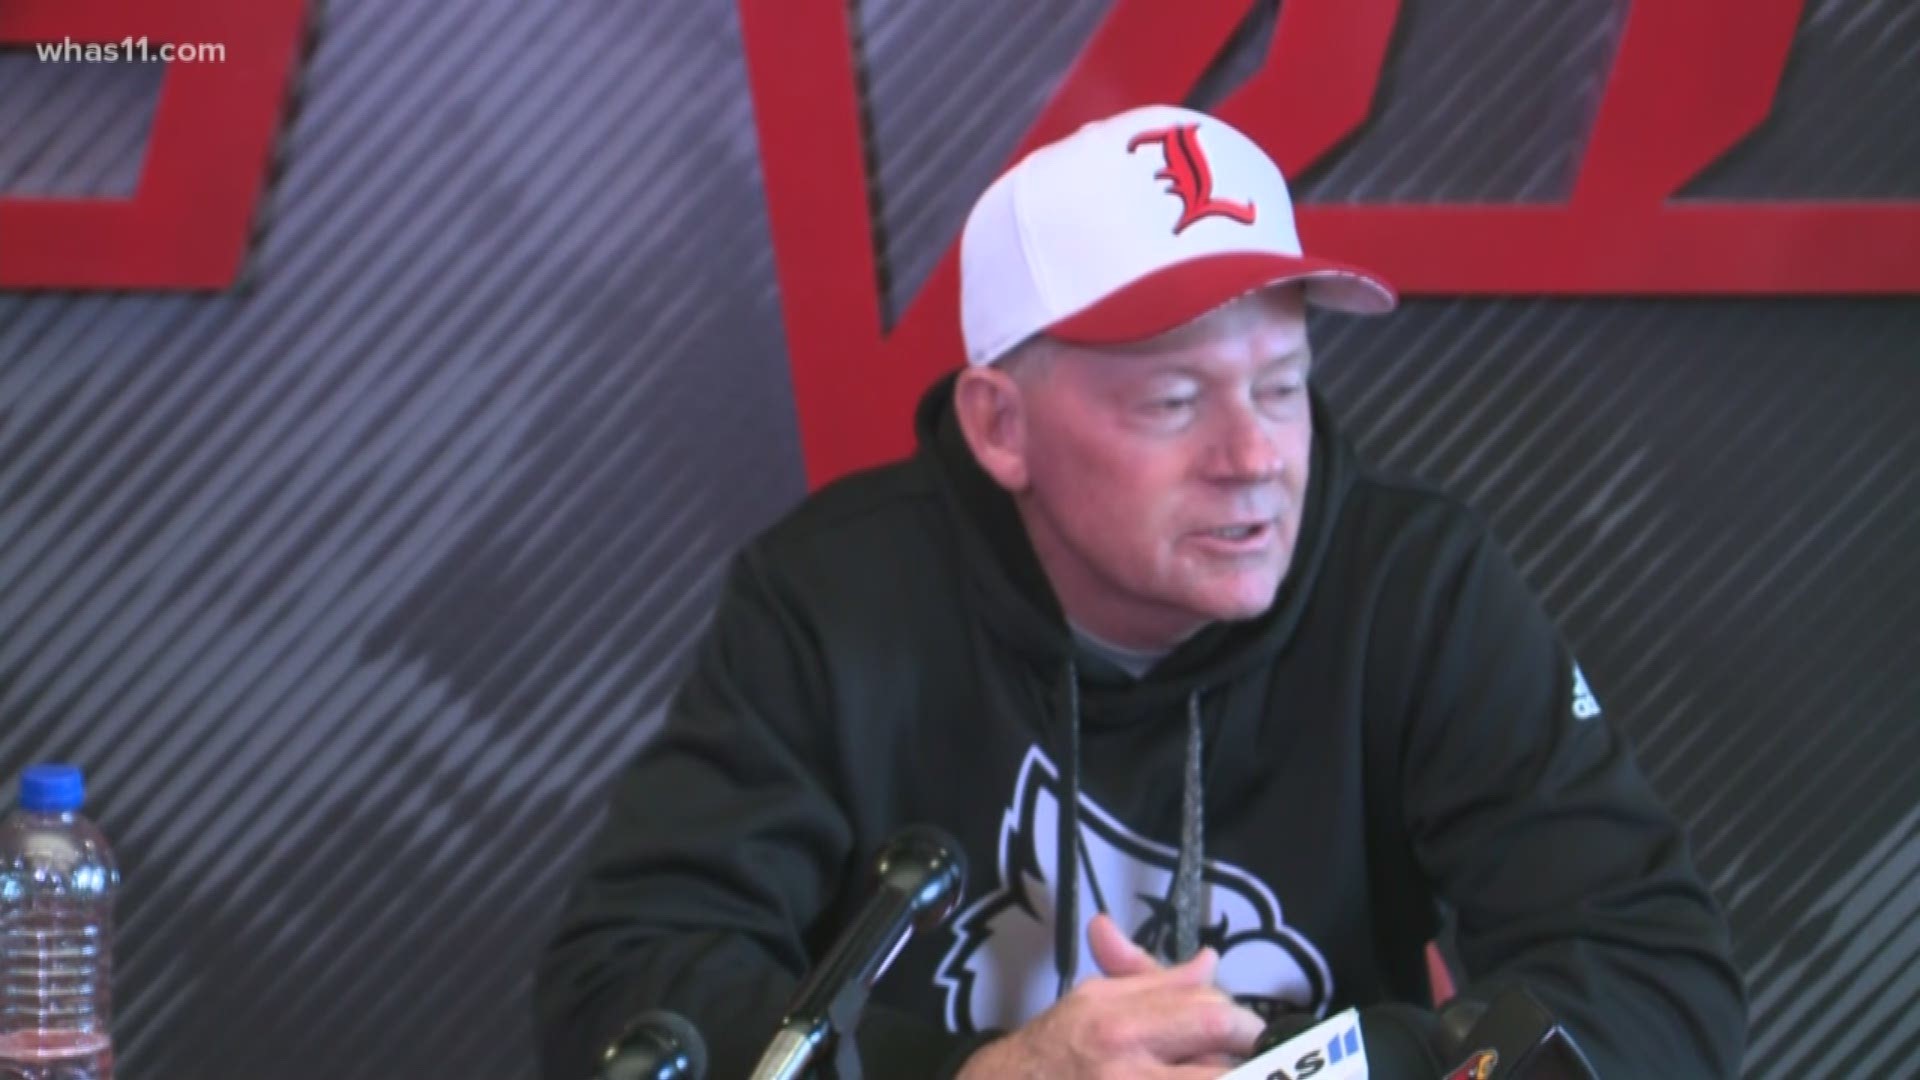 Petrino held his conference ahead of U of L's next game.